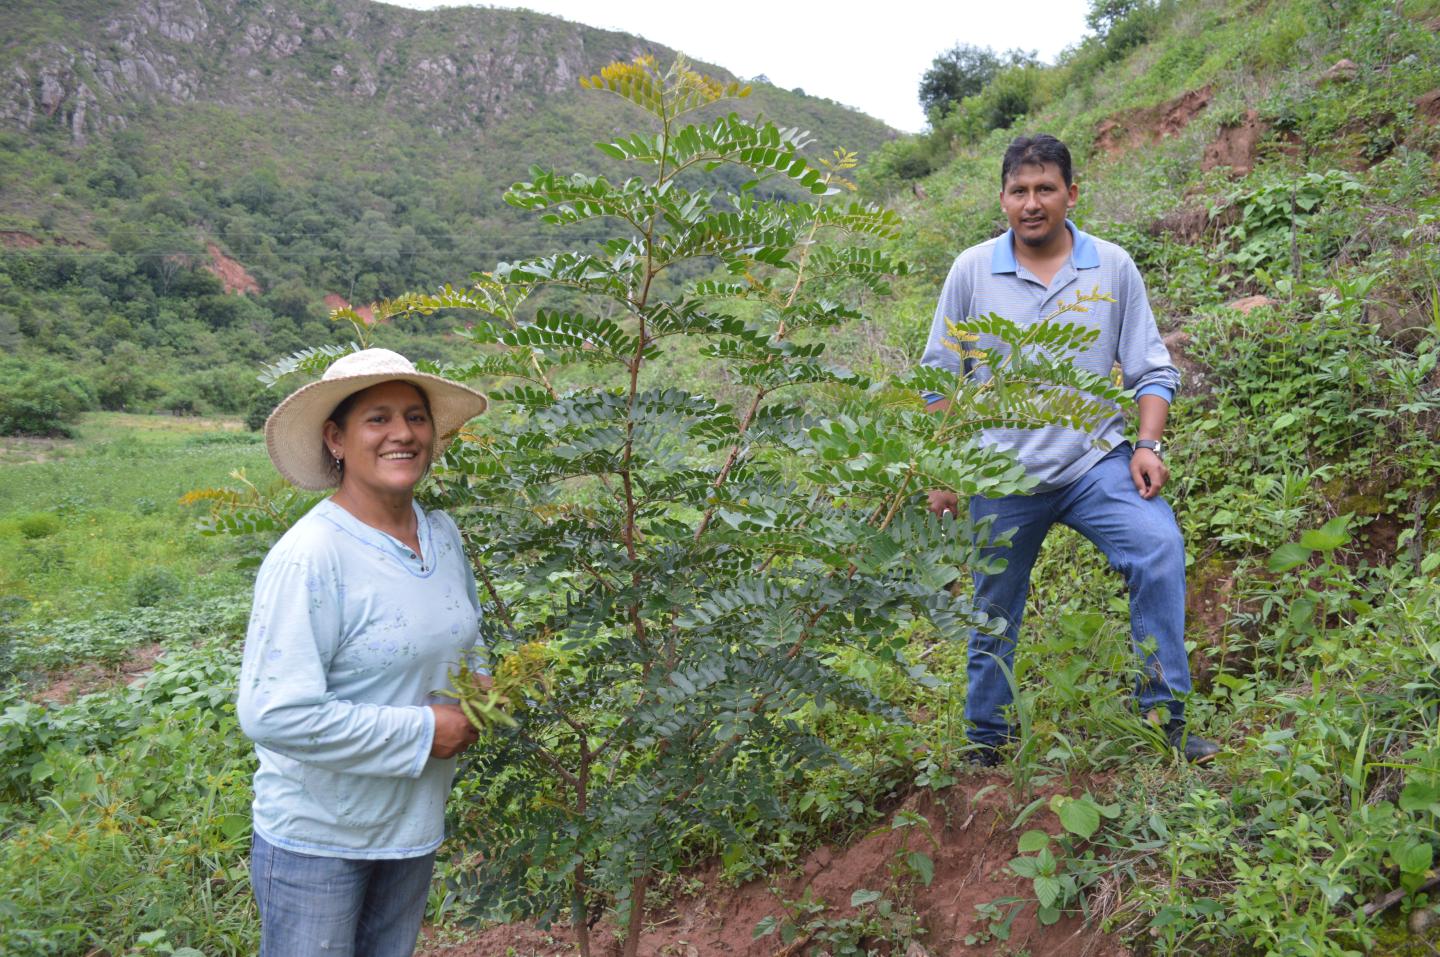 Multisectoral program to improve living conditions in rural Bolivia 